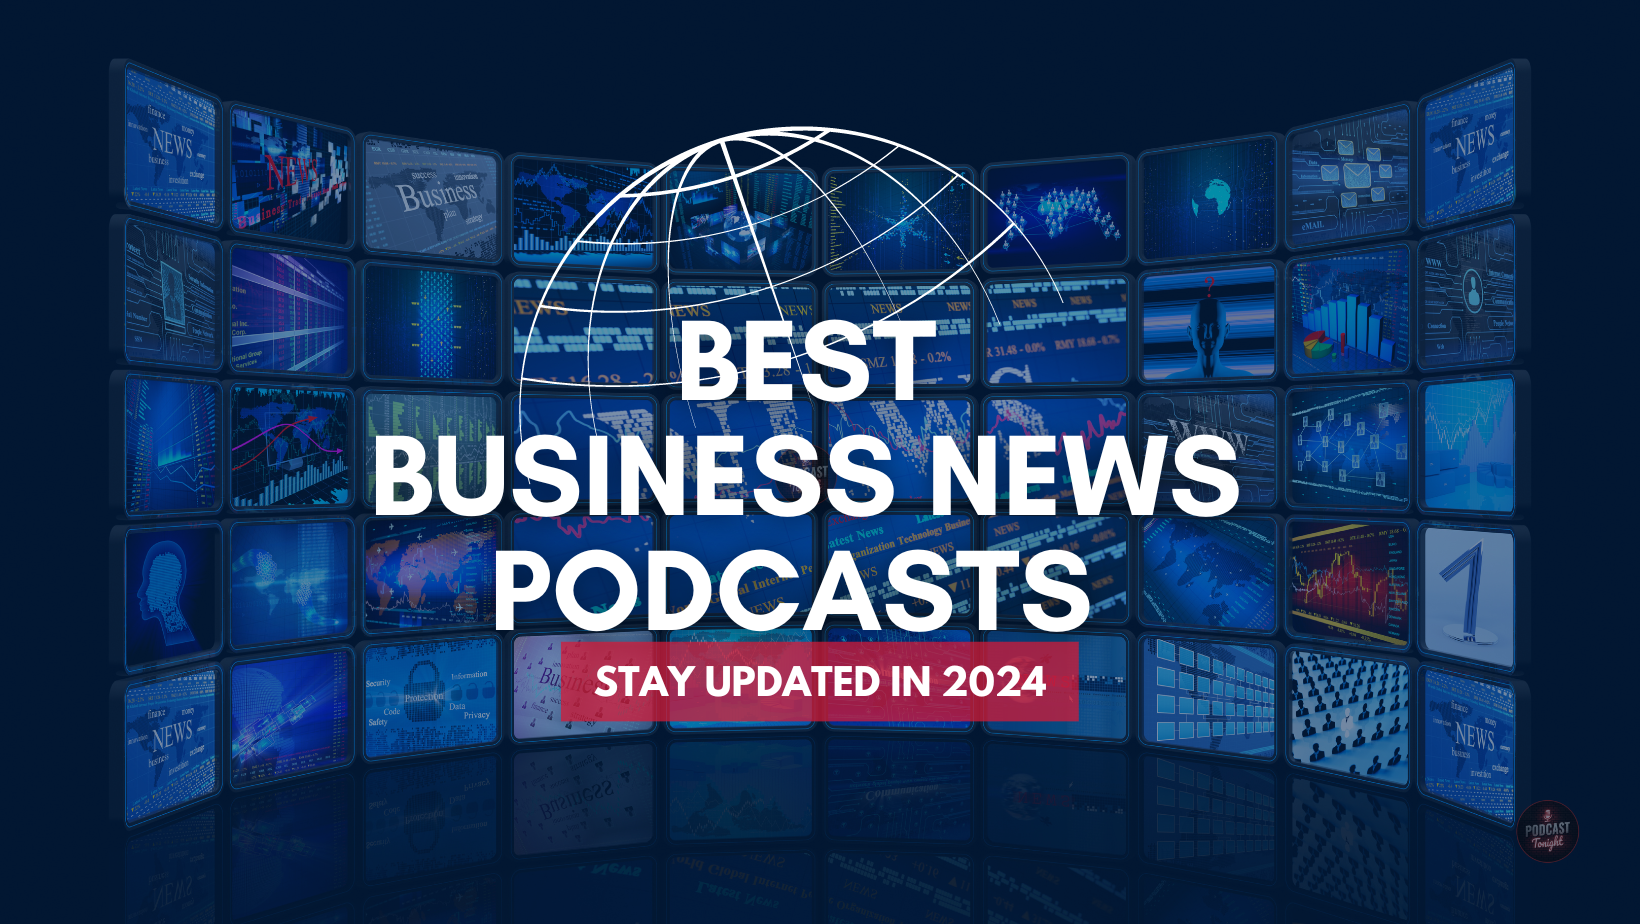 Best Business News Podcasts to Stay Updated in 2024